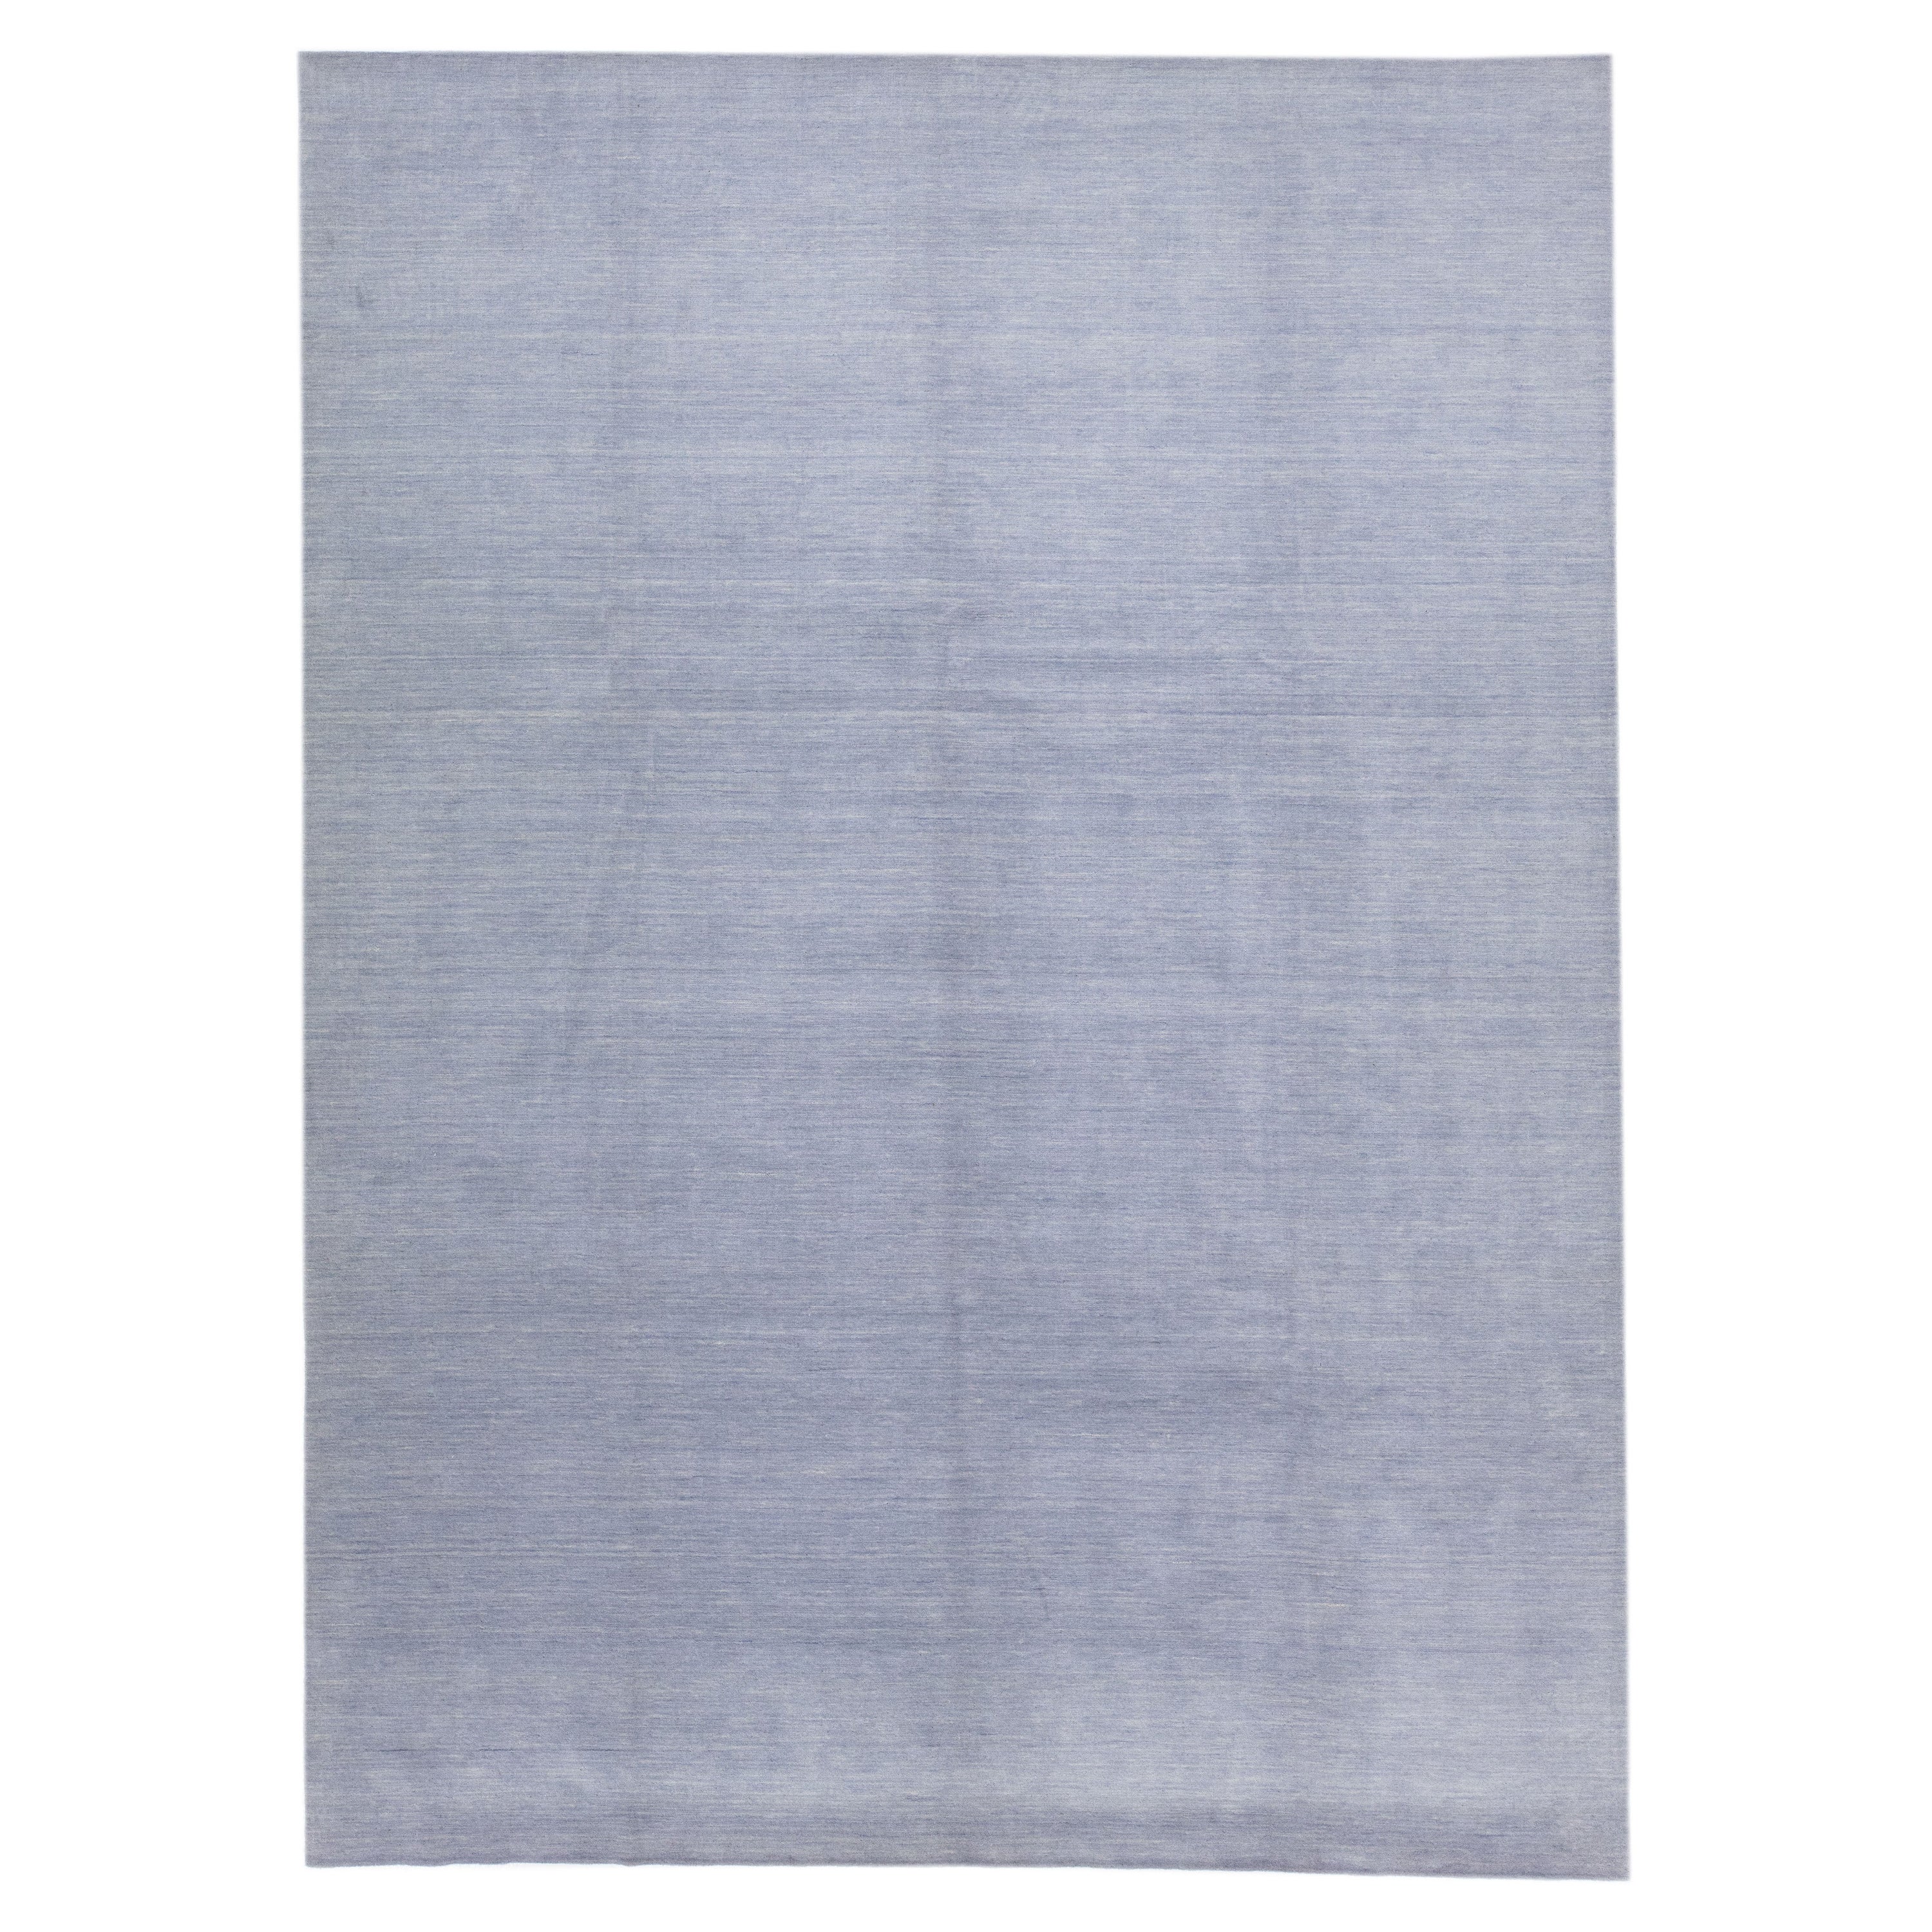 Modern Gabbeh Style Wool Rug Handmade with a Solid Blue Field For Sale